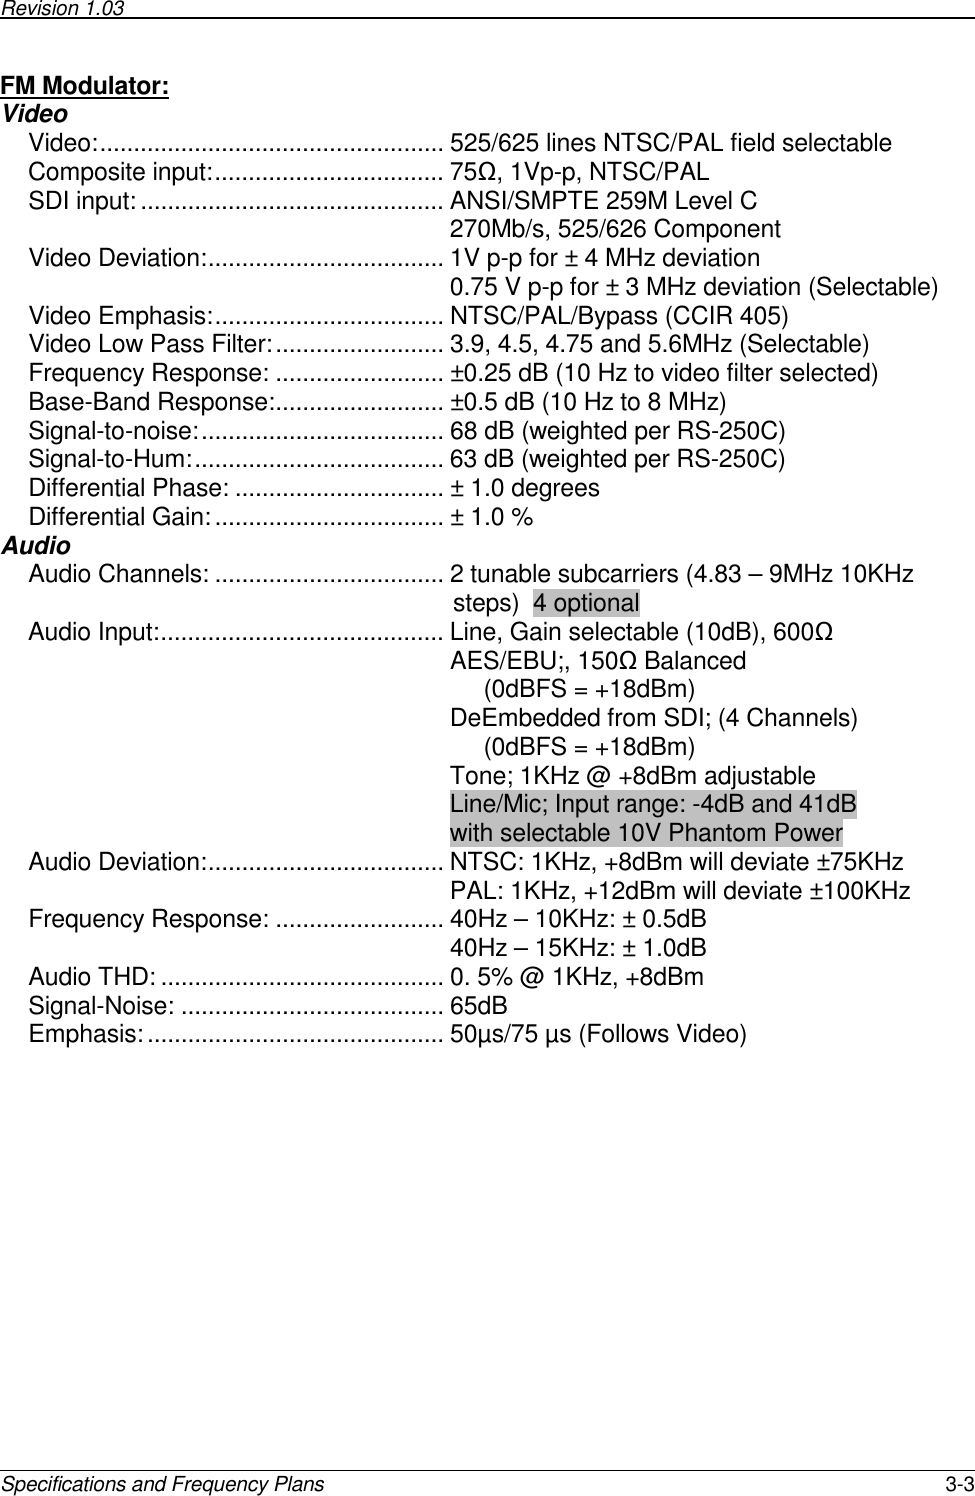 Revision 1.03        Specifications and Frequency Plans  3-3 FM Modulator:  Video Video:................................................... 525/625 lines NTSC/PAL field selectable Composite input:.................................. 75Ω, 1Vp-p, NTSC/PAL SDI input:............................................. ANSI/SMPTE 259M Level C 270Mb/s, 525/626 Component Video Deviation:................................... 1V p-p for ± 4 MHz deviation 0.75 V p-p for ± 3 MHz deviation (Selectable) Video Emphasis:.................................. NTSC/PAL/Bypass (CCIR 405) Video Low Pass Filter:......................... 3.9, 4.5, 4.75 and 5.6MHz (Selectable) Frequency Response: ......................... ±0.25 dB (10 Hz to video filter selected) Base-Band Response:......................... ±0.5 dB (10 Hz to 8 MHz) Signal-to-noise:.................................... 68 dB (weighted per RS-250C) Signal-to-Hum:..................................... 63 dB (weighted per RS-250C) Differential Phase: ............................... ± 1.0 degrees Differential Gain:.................................. ± 1.0 % Audio Audio Channels: .................................. 2 tunable subcarriers (4.83 – 9MHz 10KHz                                                                steps)  4 optional Audio Input:.......................................... Line, Gain selectable (10dB), 600Ω AES/EBU;, 150Ω Balanced      (0dBFS = +18dBm) DeEmbedded from SDI; (4 Channels)      (0dBFS = +18dBm) Tone; 1KHz @ +8dBm adjustable Line/Mic; Input range: -4dB and 41dB with selectable 10V Phantom Power Audio Deviation:................................... NTSC: 1KHz, +8dBm will deviate ±75KHz PAL: 1KHz, +12dBm will deviate ±100KHz Frequency Response: ......................... 40Hz – 10KHz: ± 0.5dB  40Hz – 15KHz: ± 1.0dB  Audio THD: .......................................... 0. 5% @ 1KHz, +8dBm Signal-Noise: ....................................... 65dB Emphasis: ............................................ 50µs/75 µs (Follows Video) 